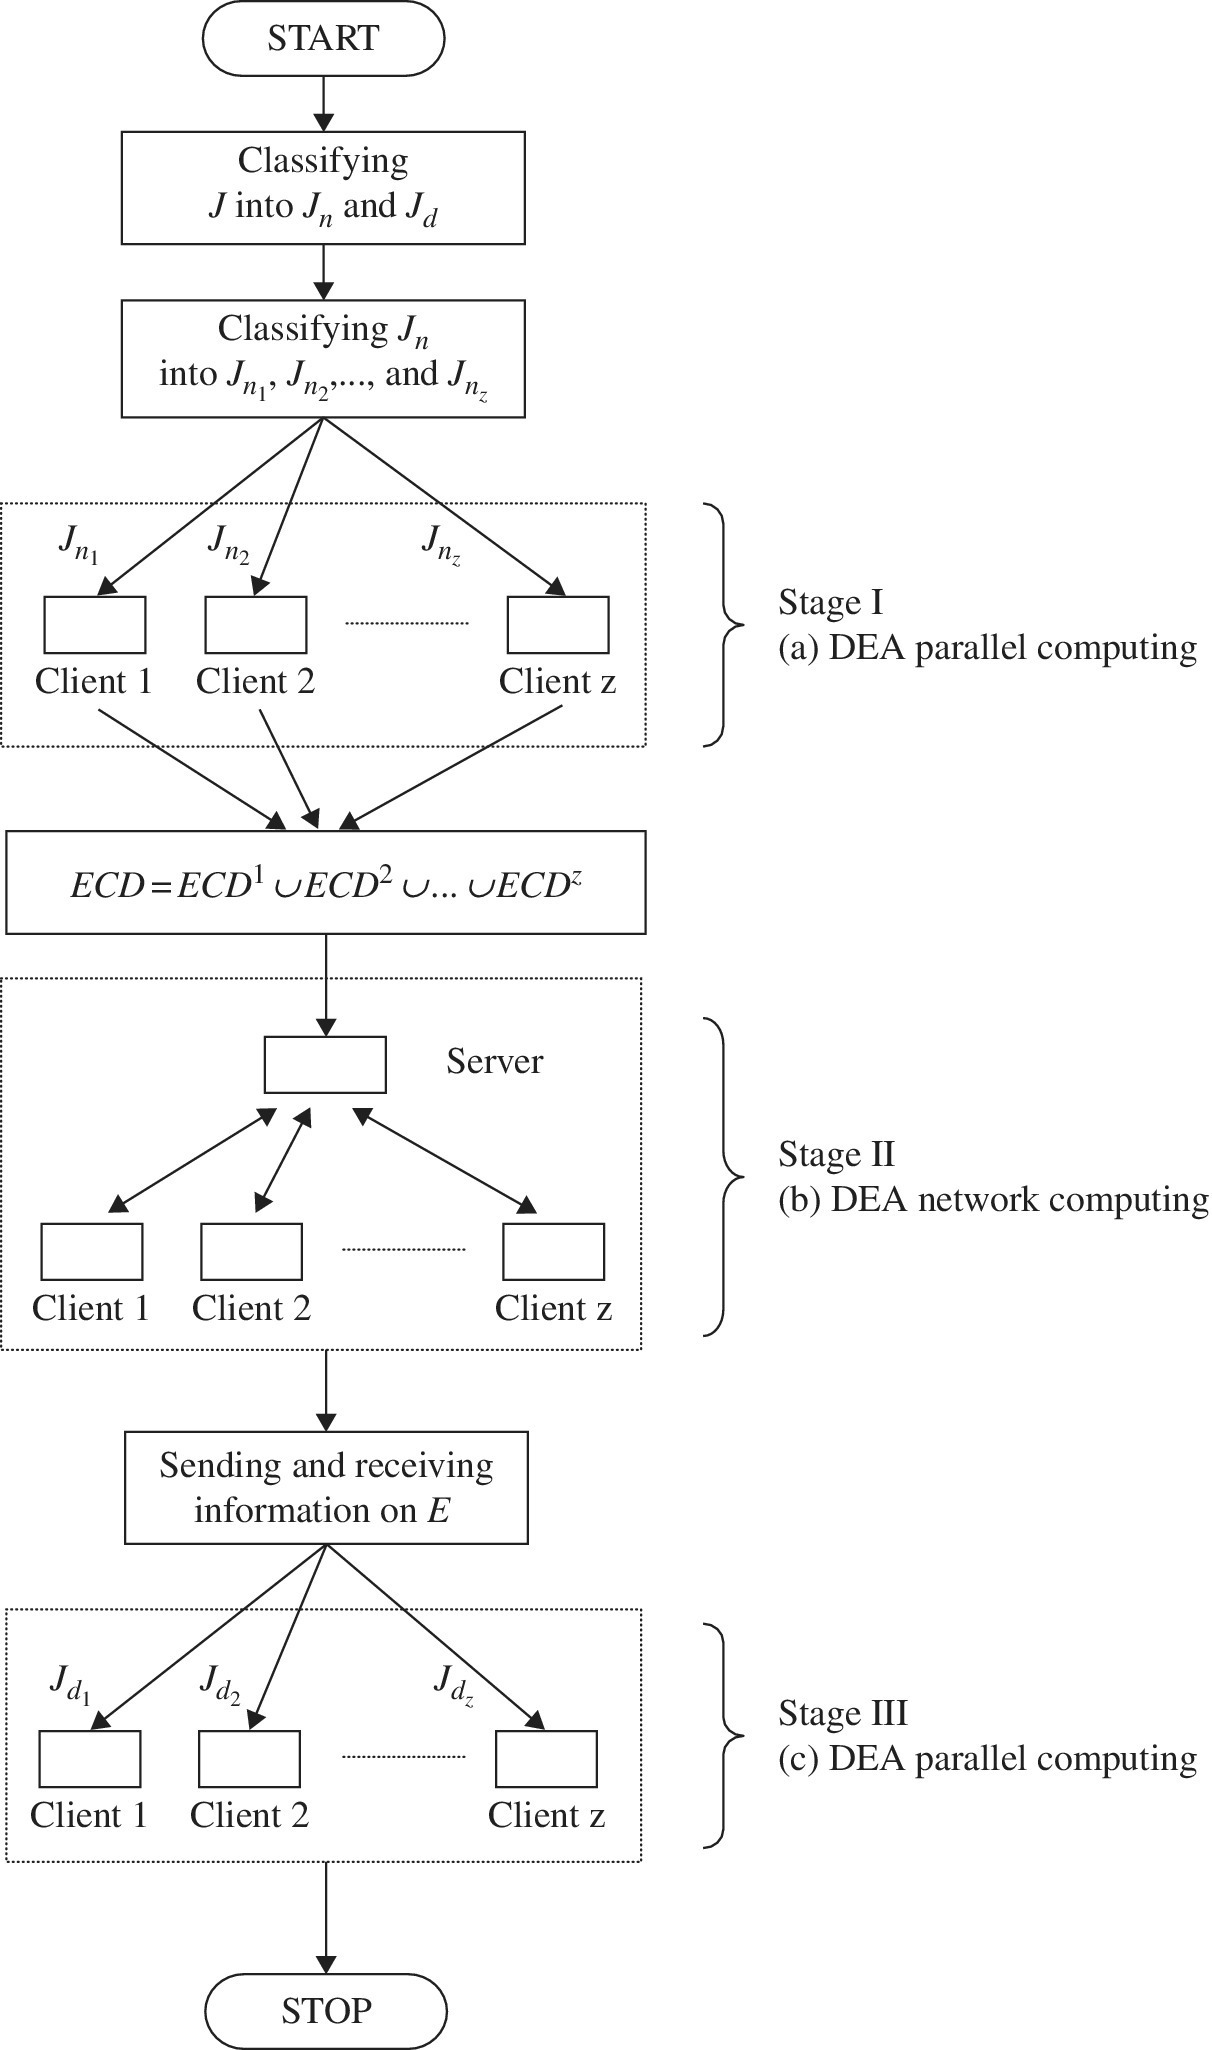 Algorithm of the computational strategy for network computing involving 3 stages, including DEA parallel computing, DEA network computing, etc. Start box branches to classifying J into Jn and Jd and branches further.